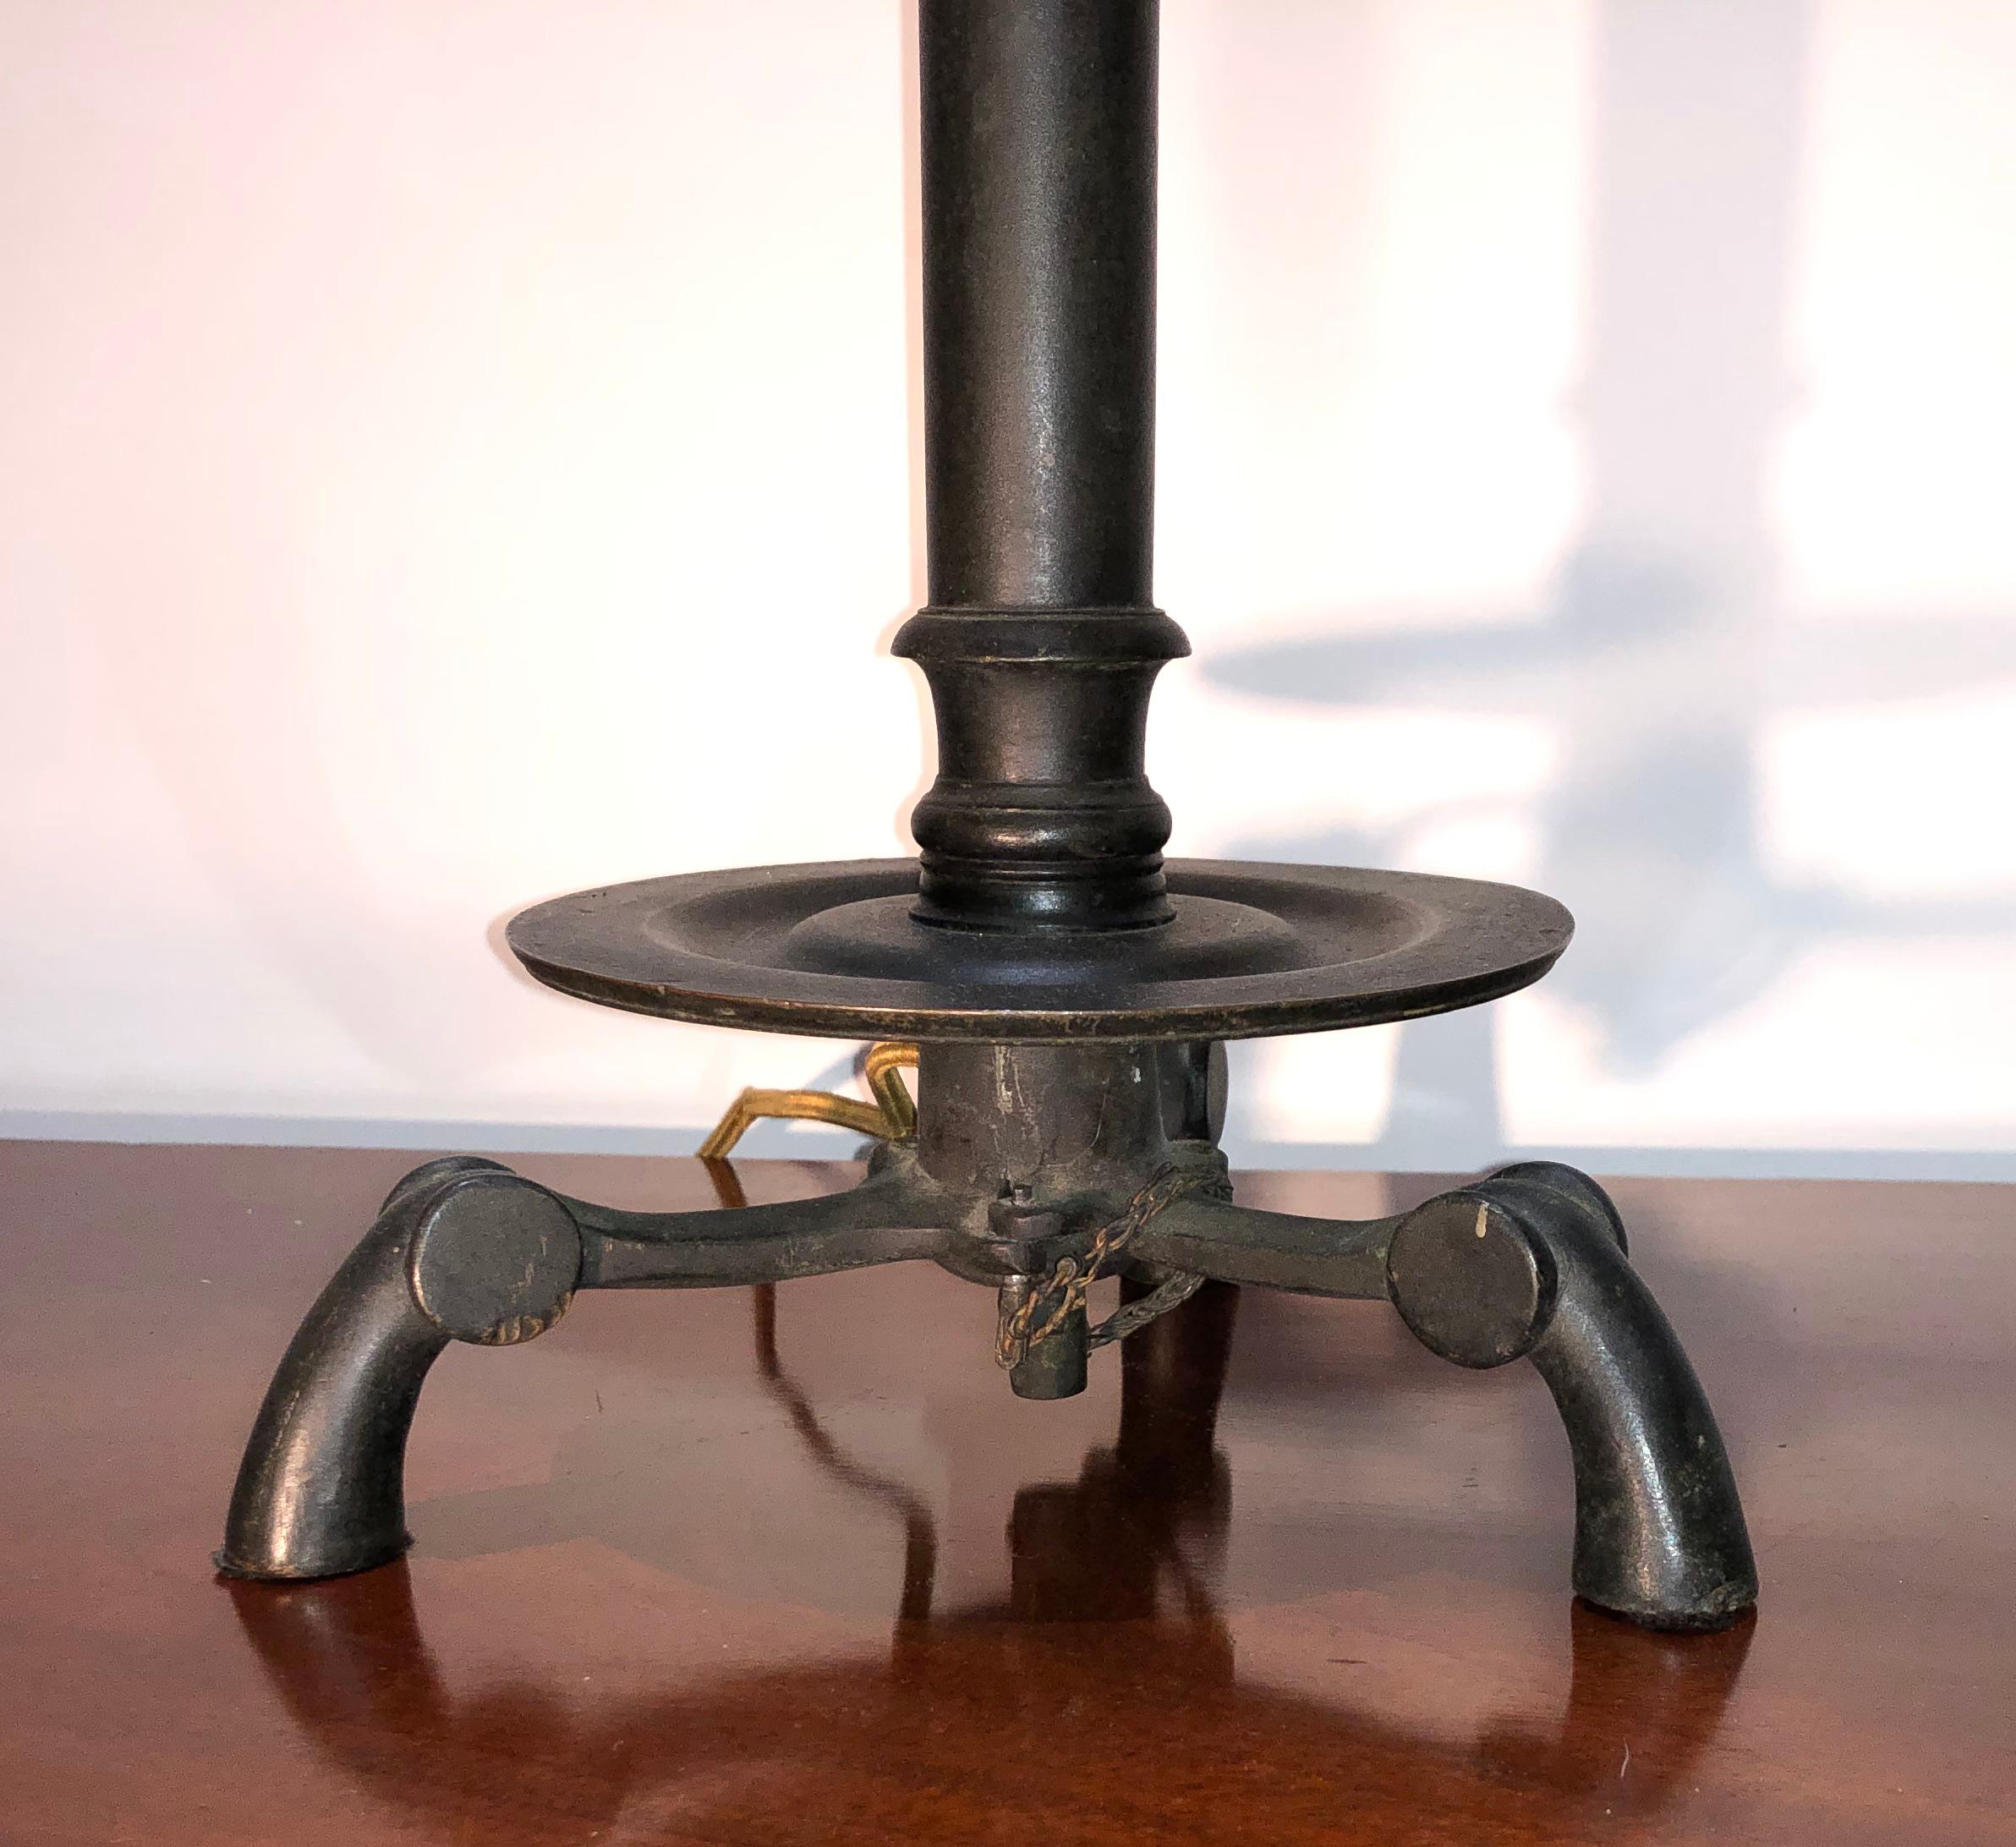 A rare 19th century military campaign French candlestick with folding legs. This great candlestick is made of bronze and was converted from candle to electricity.